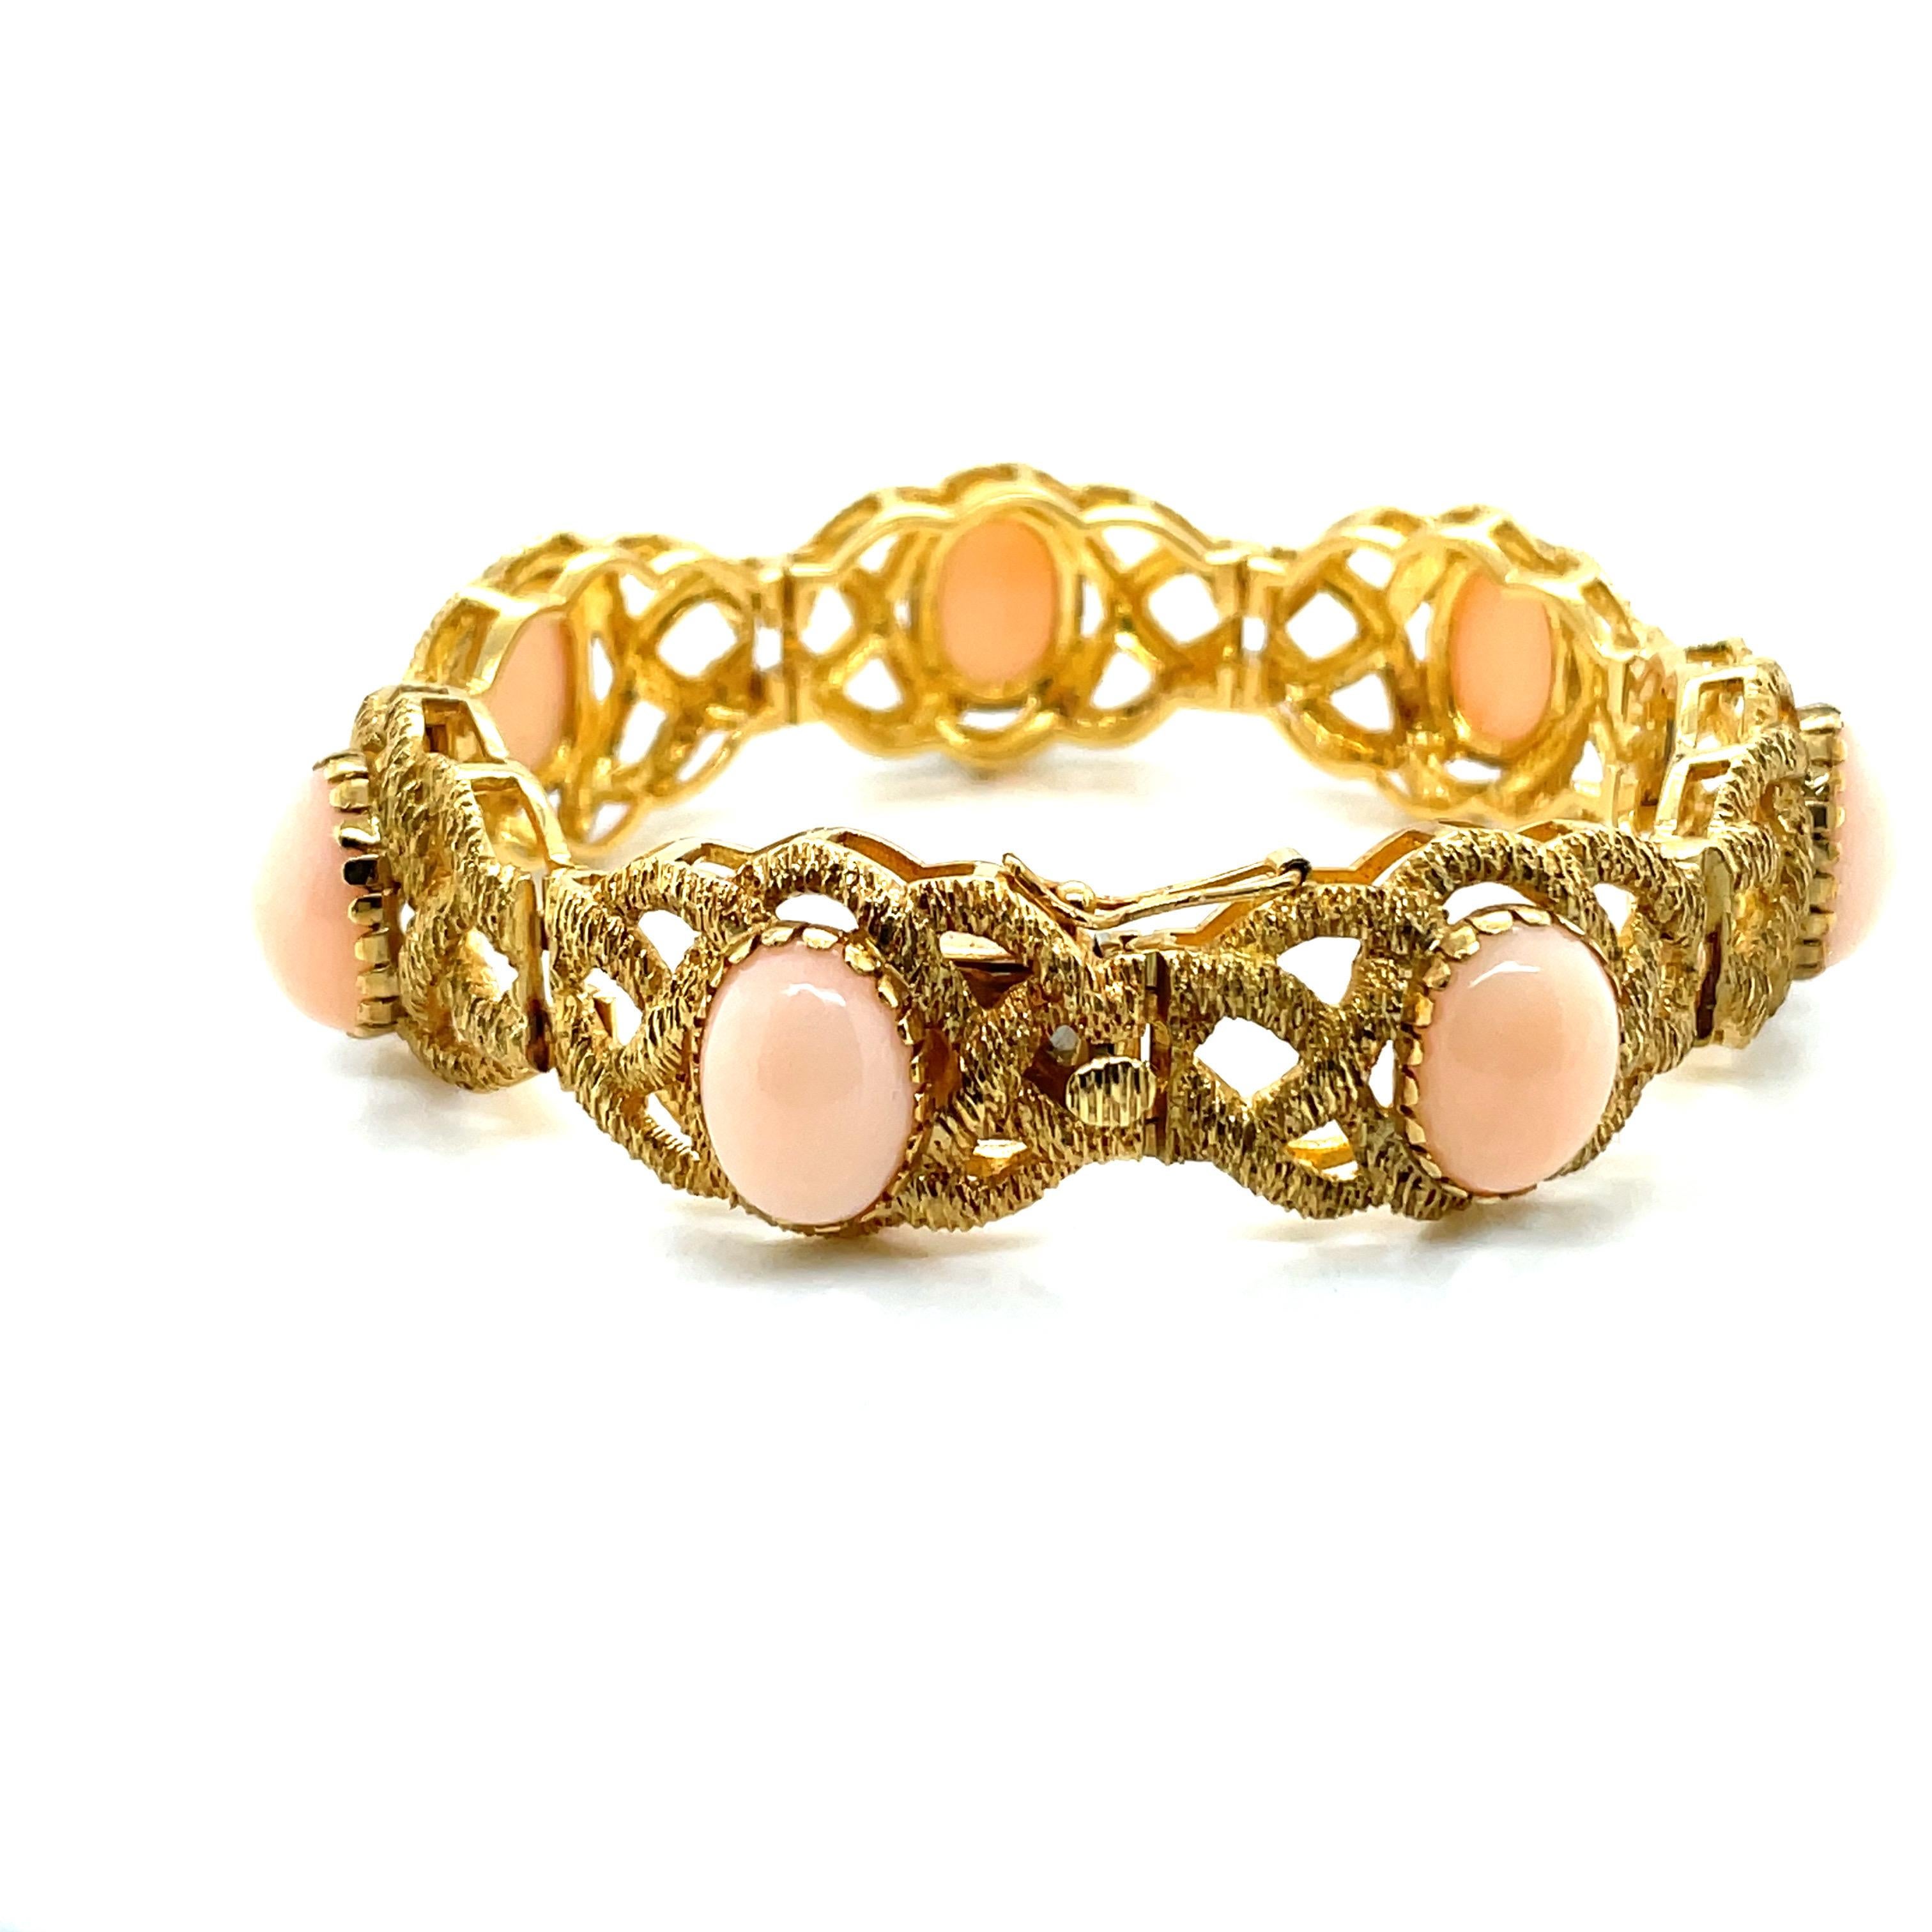 Vintage 18k Yellow Gold Wide Bracelet with Oval Pink Coral Gemstones In Good Condition For Sale In Boston, MA